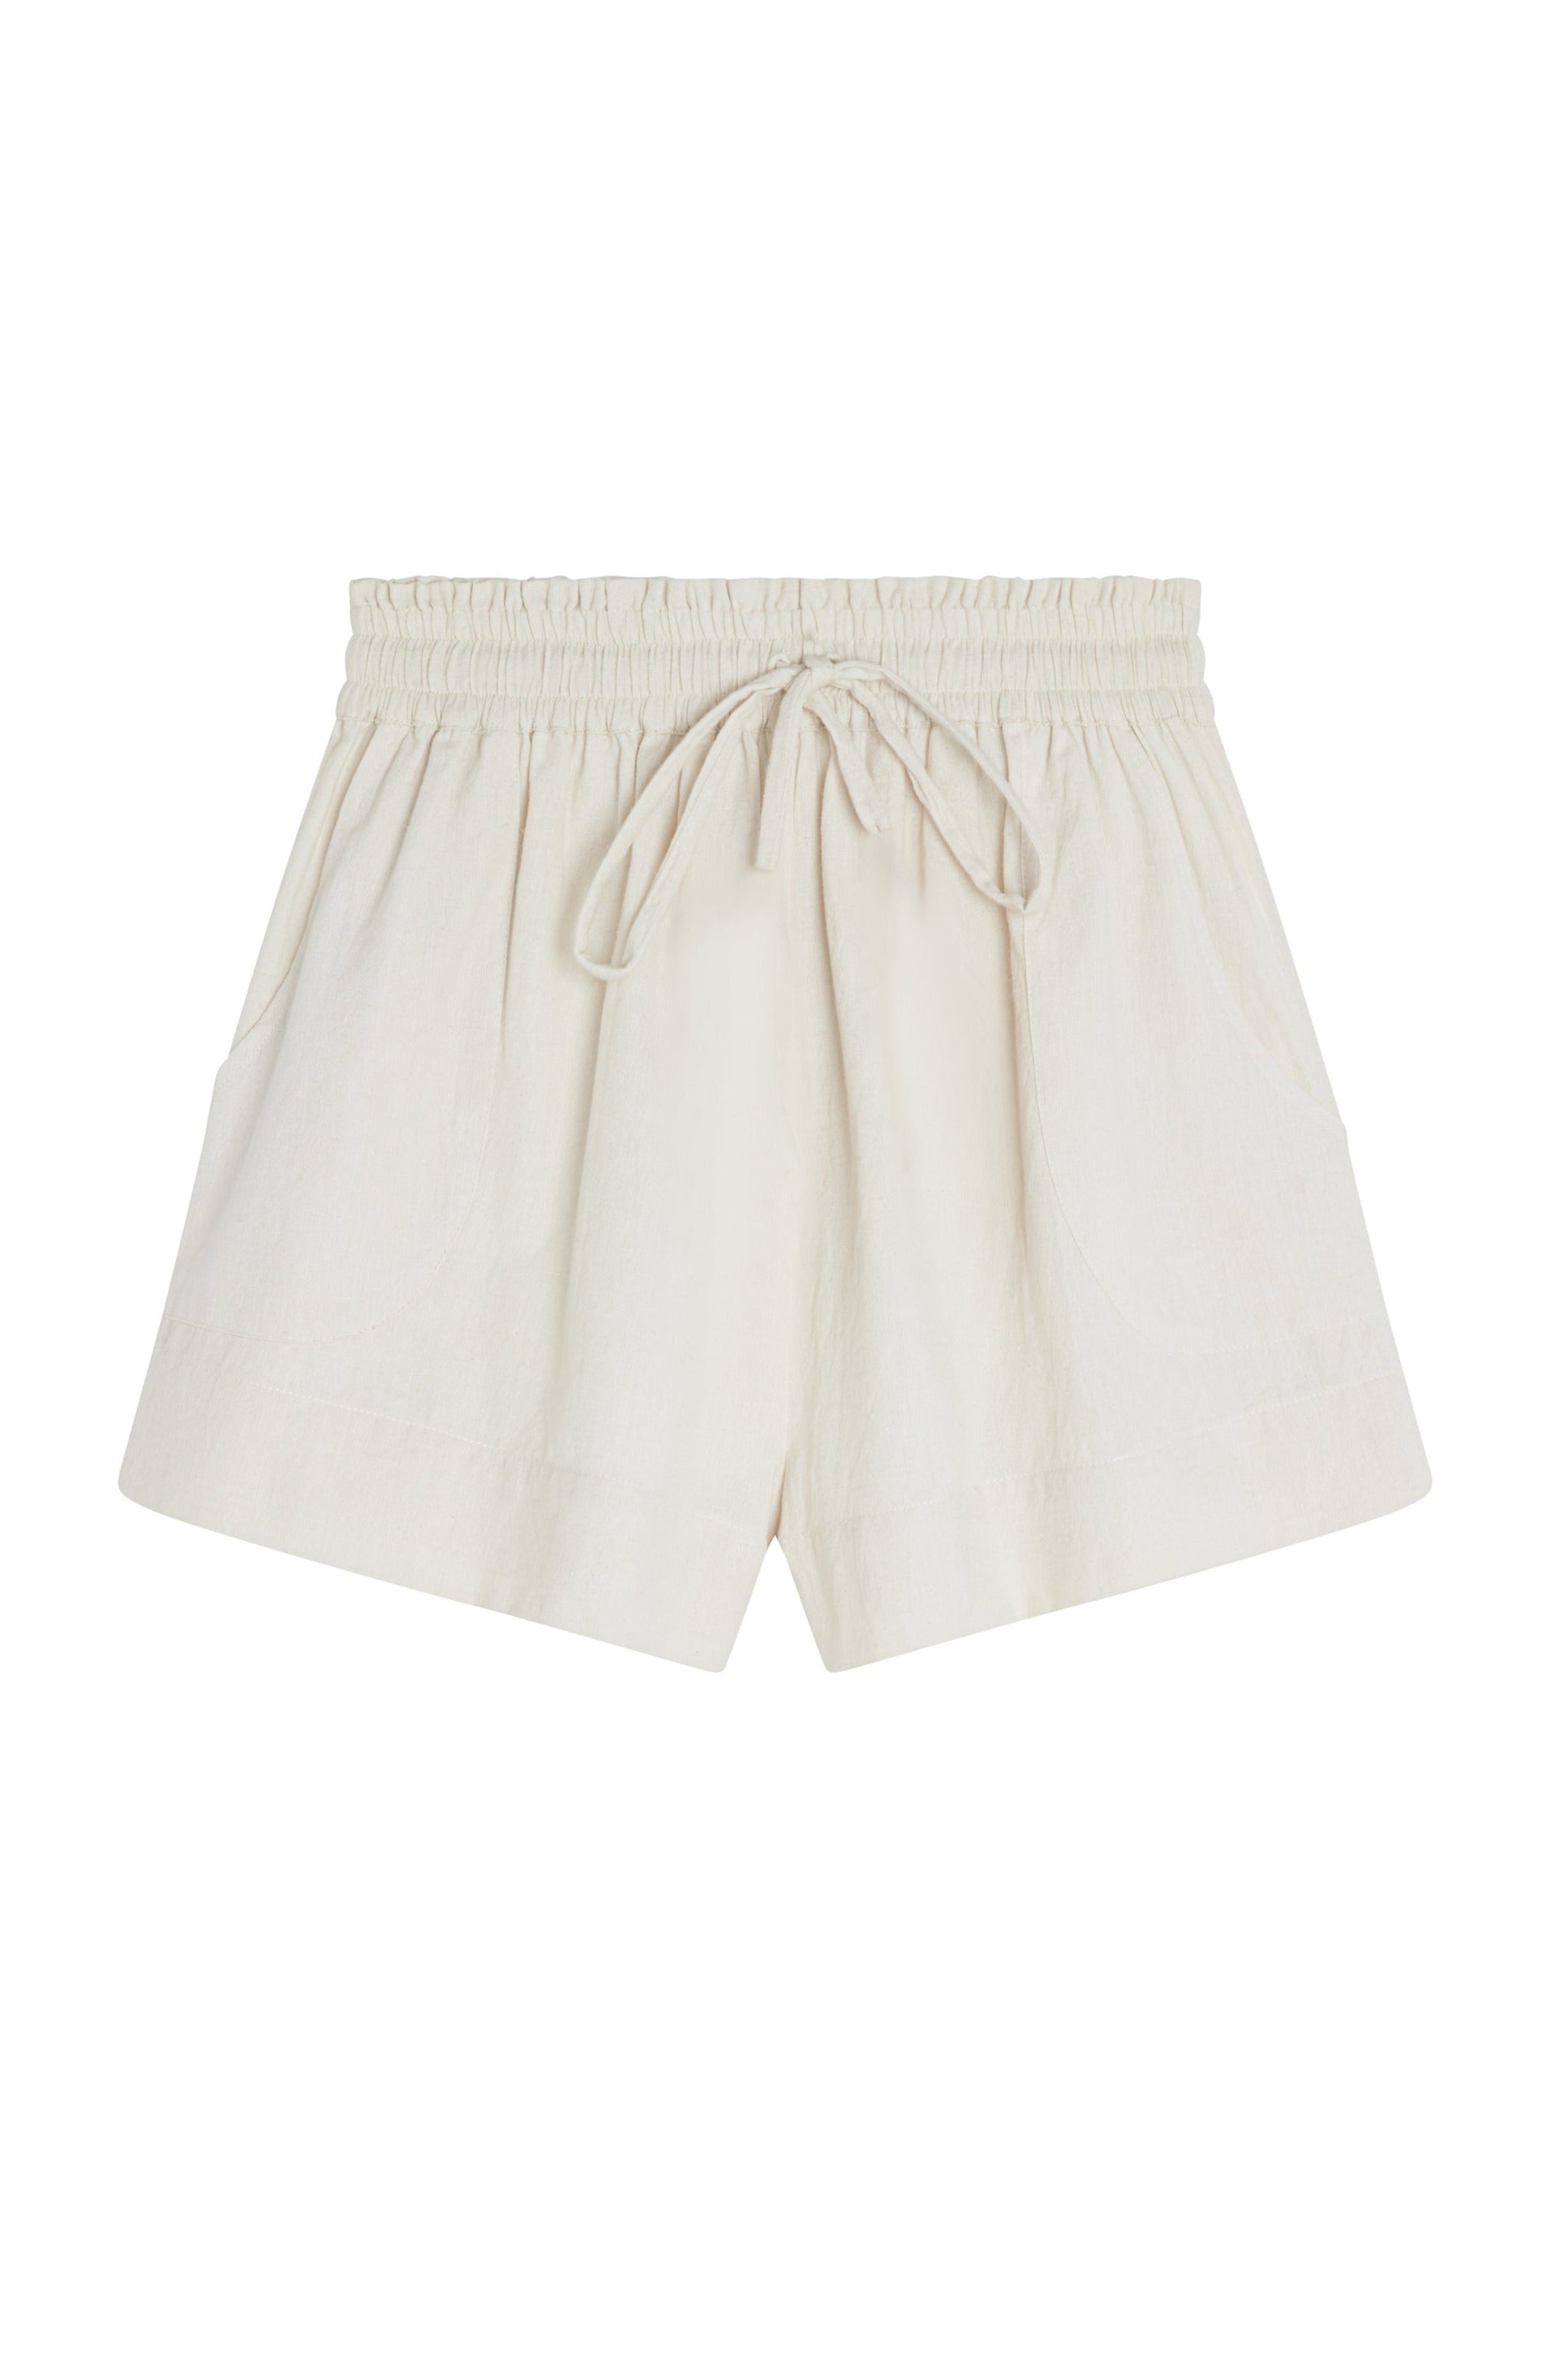 These bone colored shorts compliment any modern wardrobe. Featuring a comfortable fit with an elastic waist and drawstring, and pockets. 100% cotton. Ethically made in India.